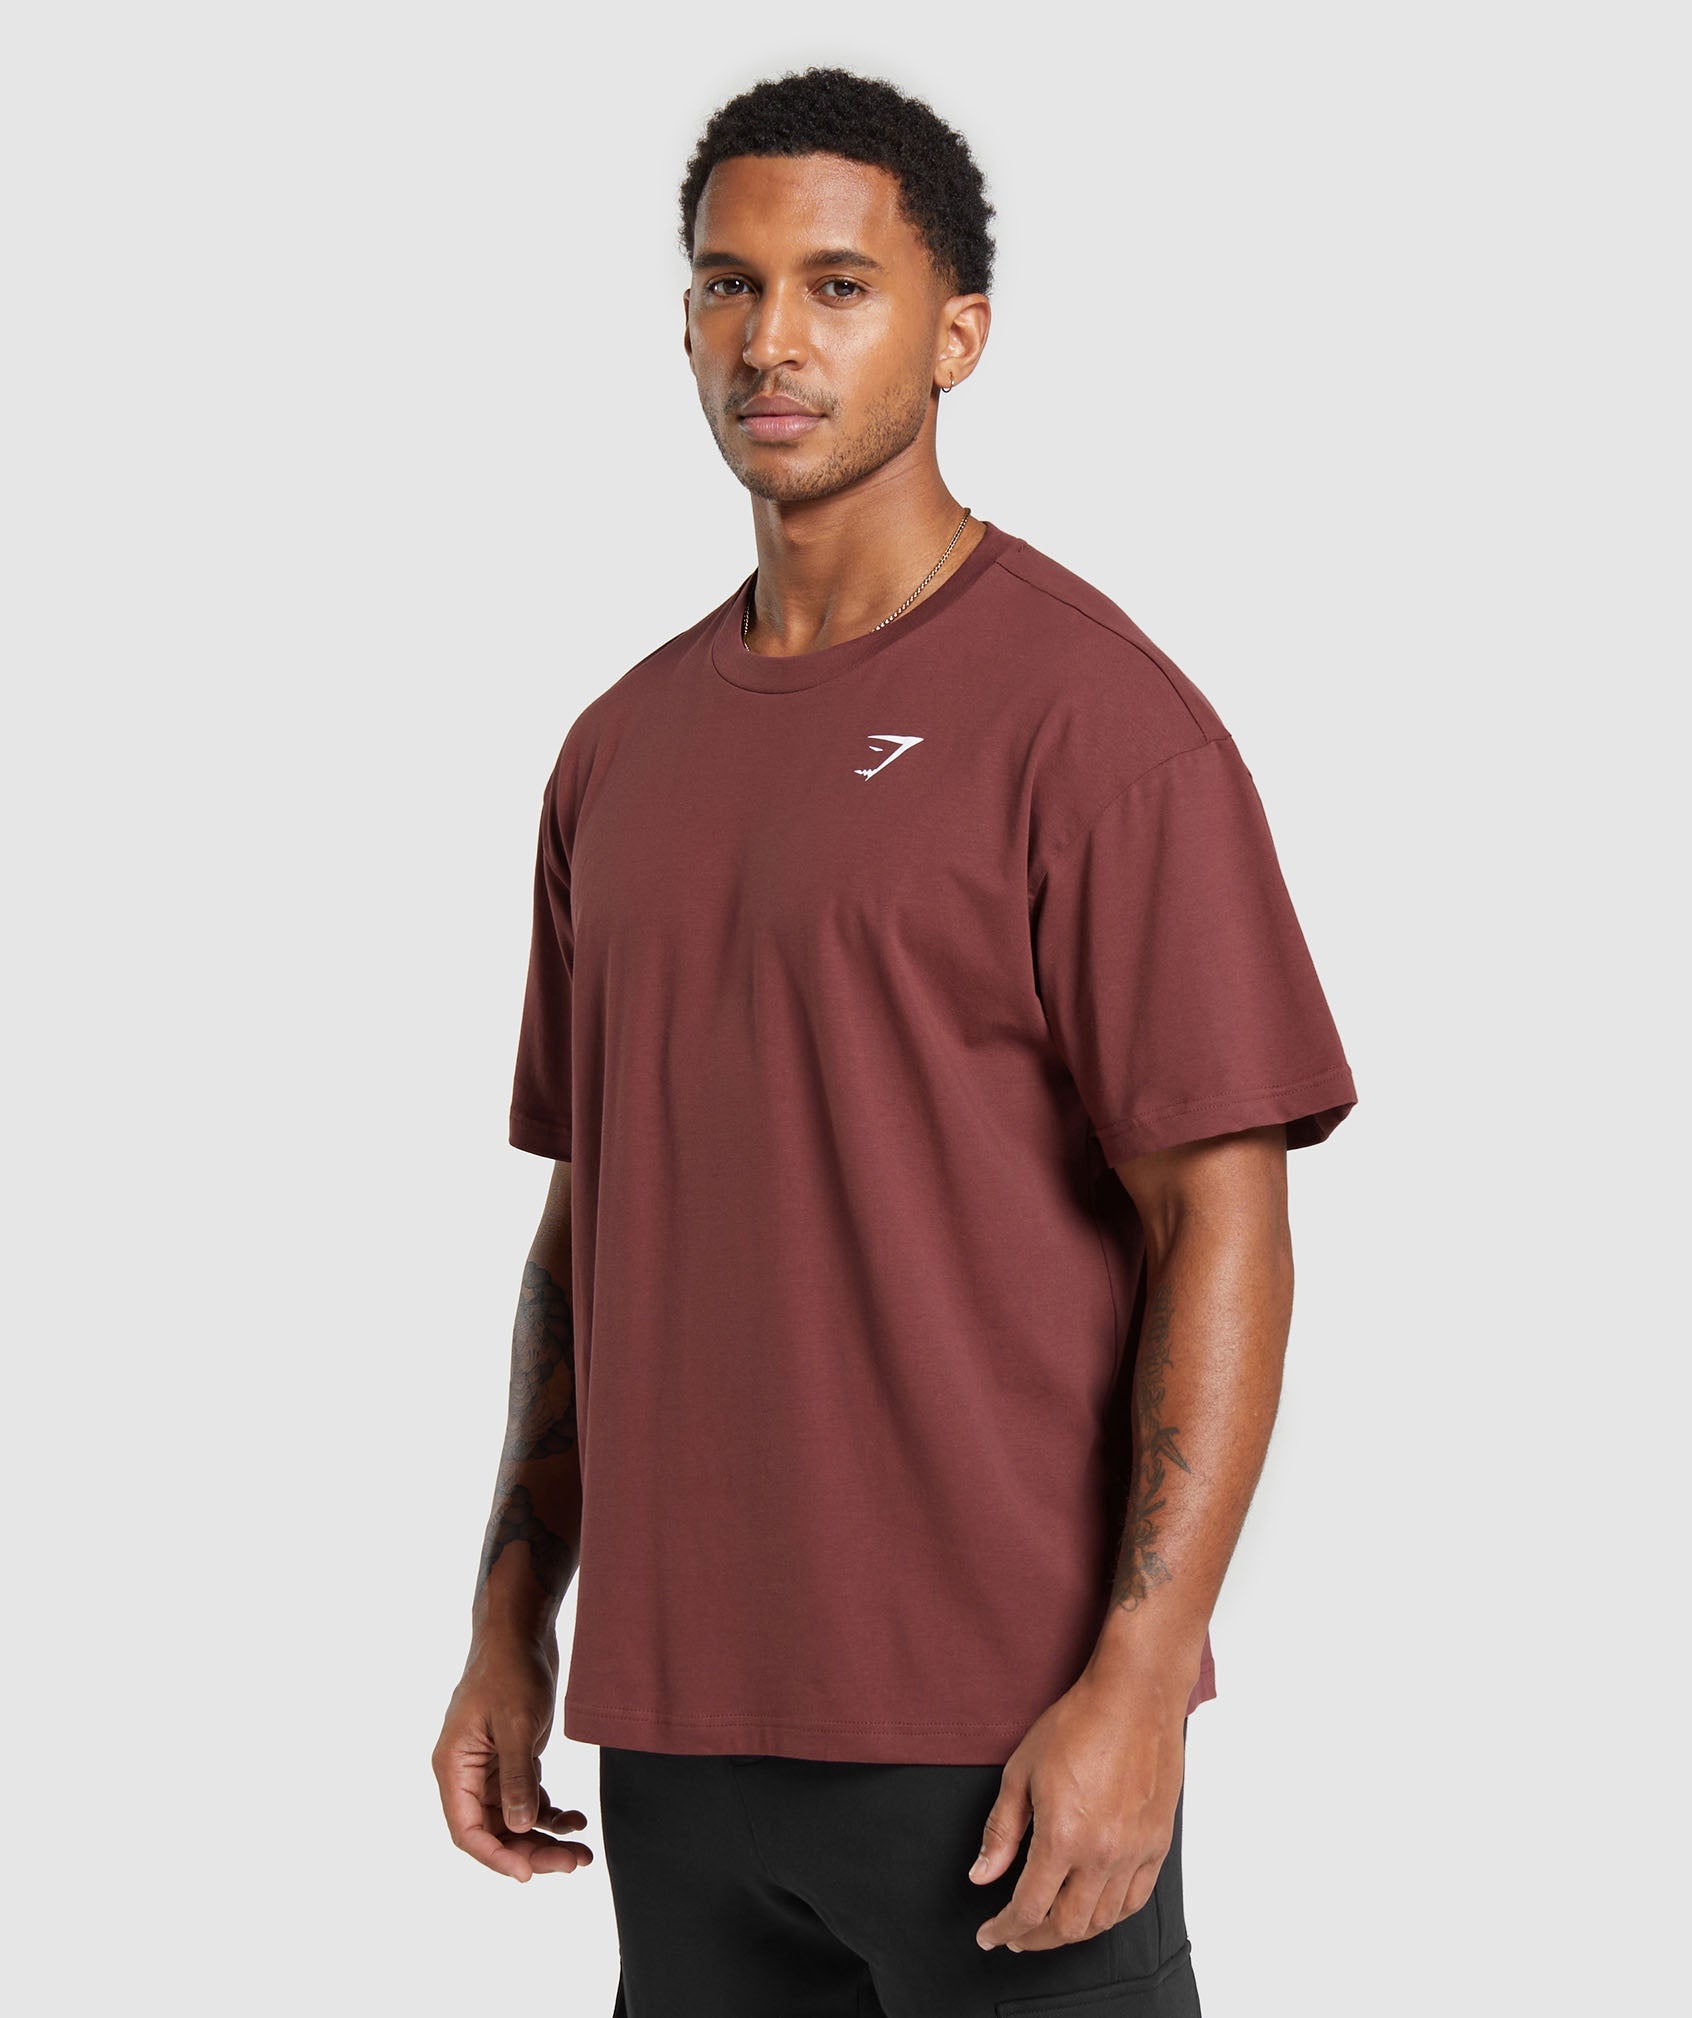 Essential Oversized T-Shirt in Burgundy Brown - view 3